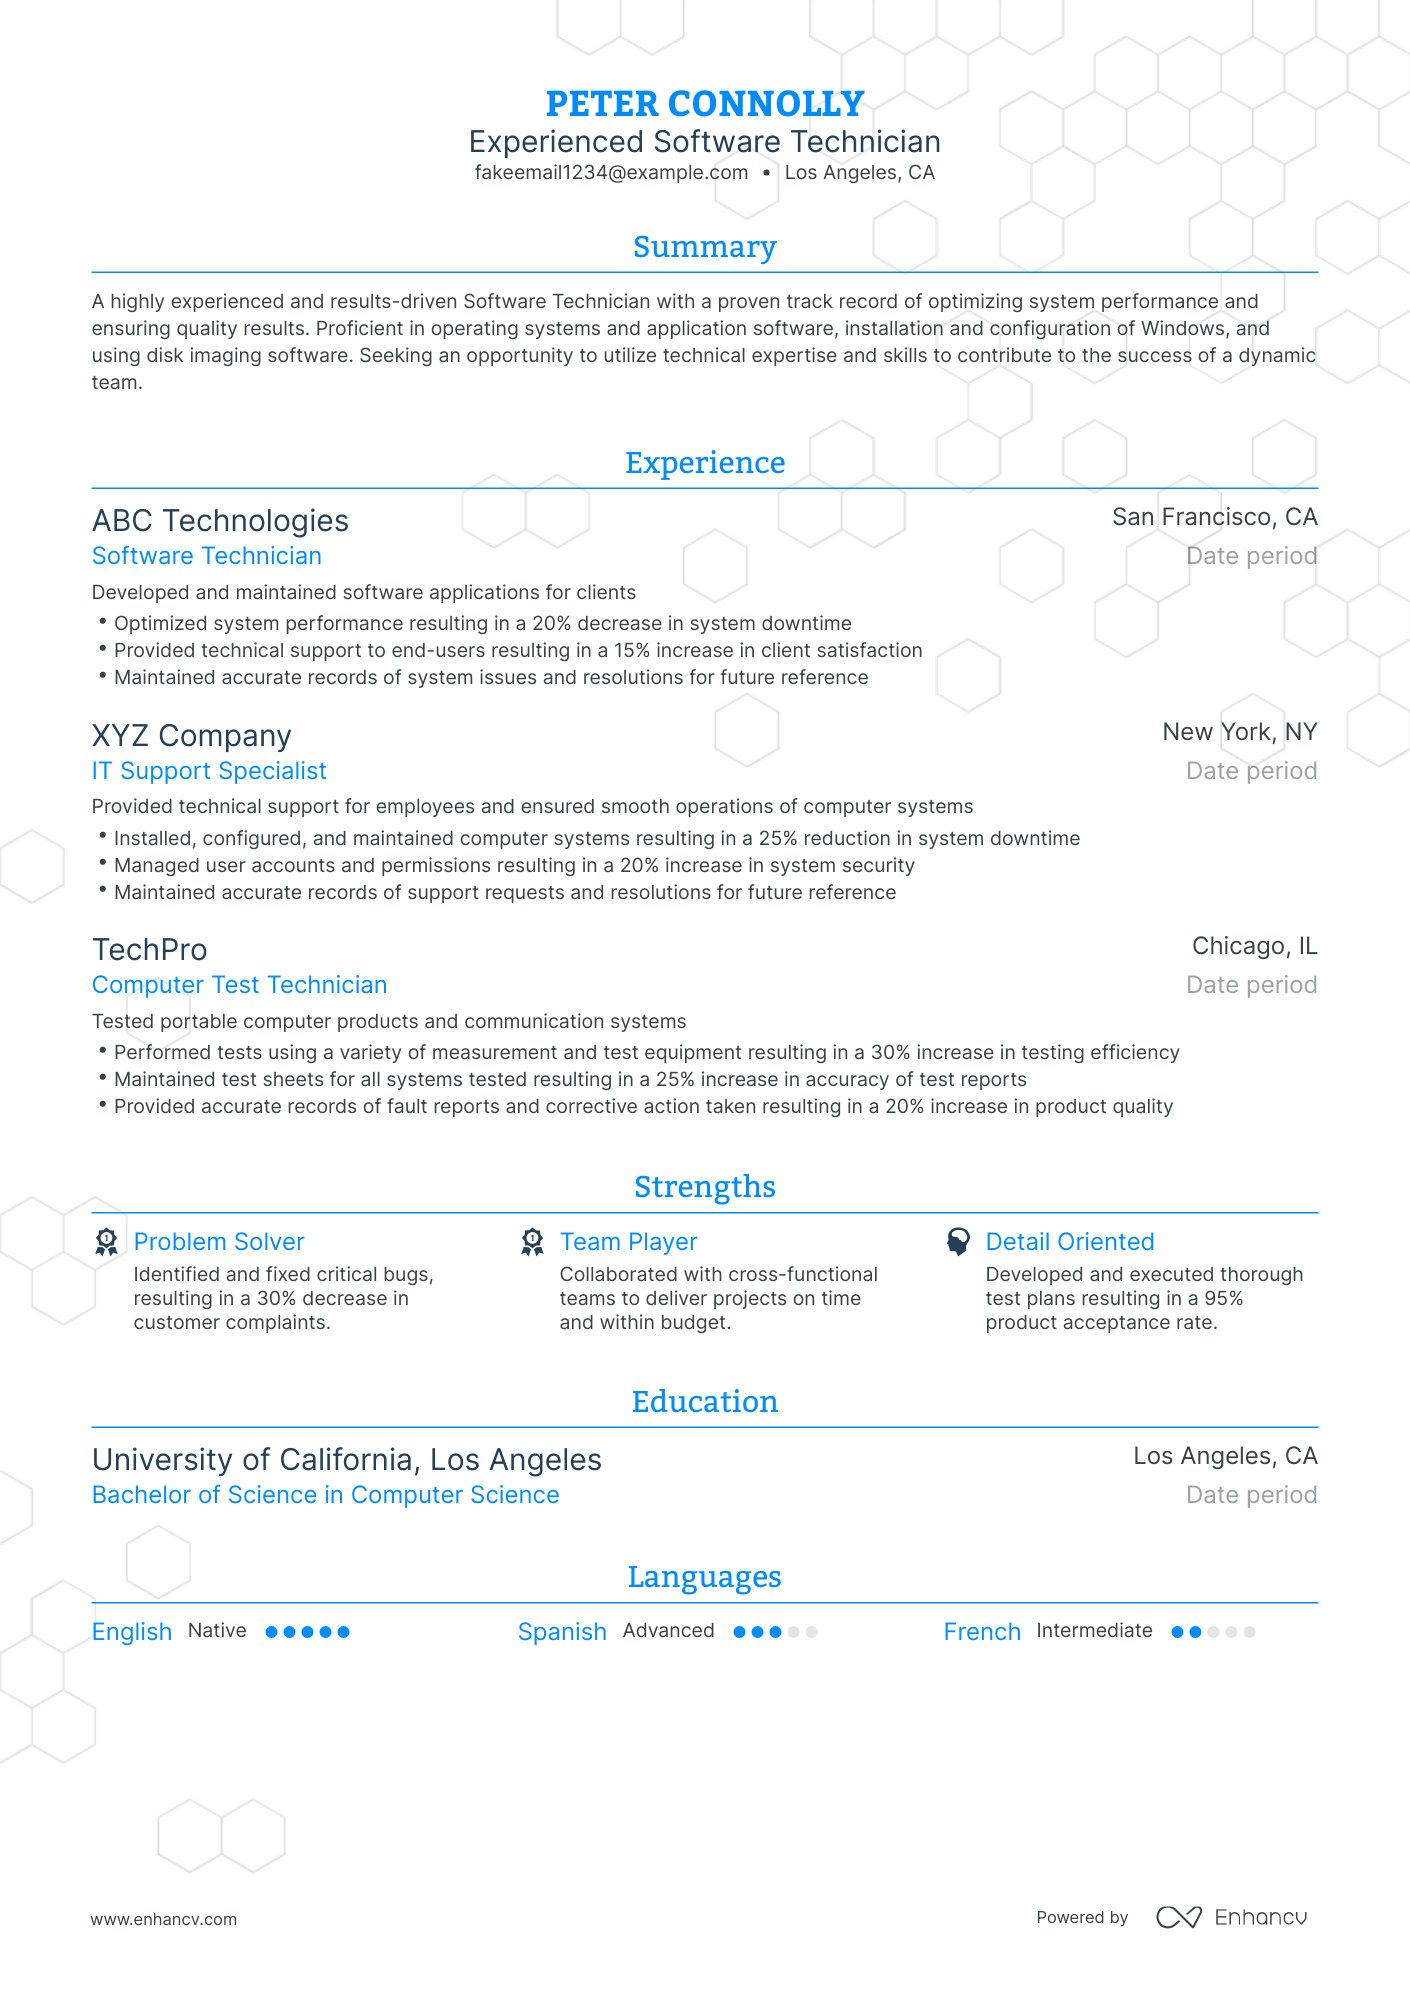 Traditional Software Technician Resume Template